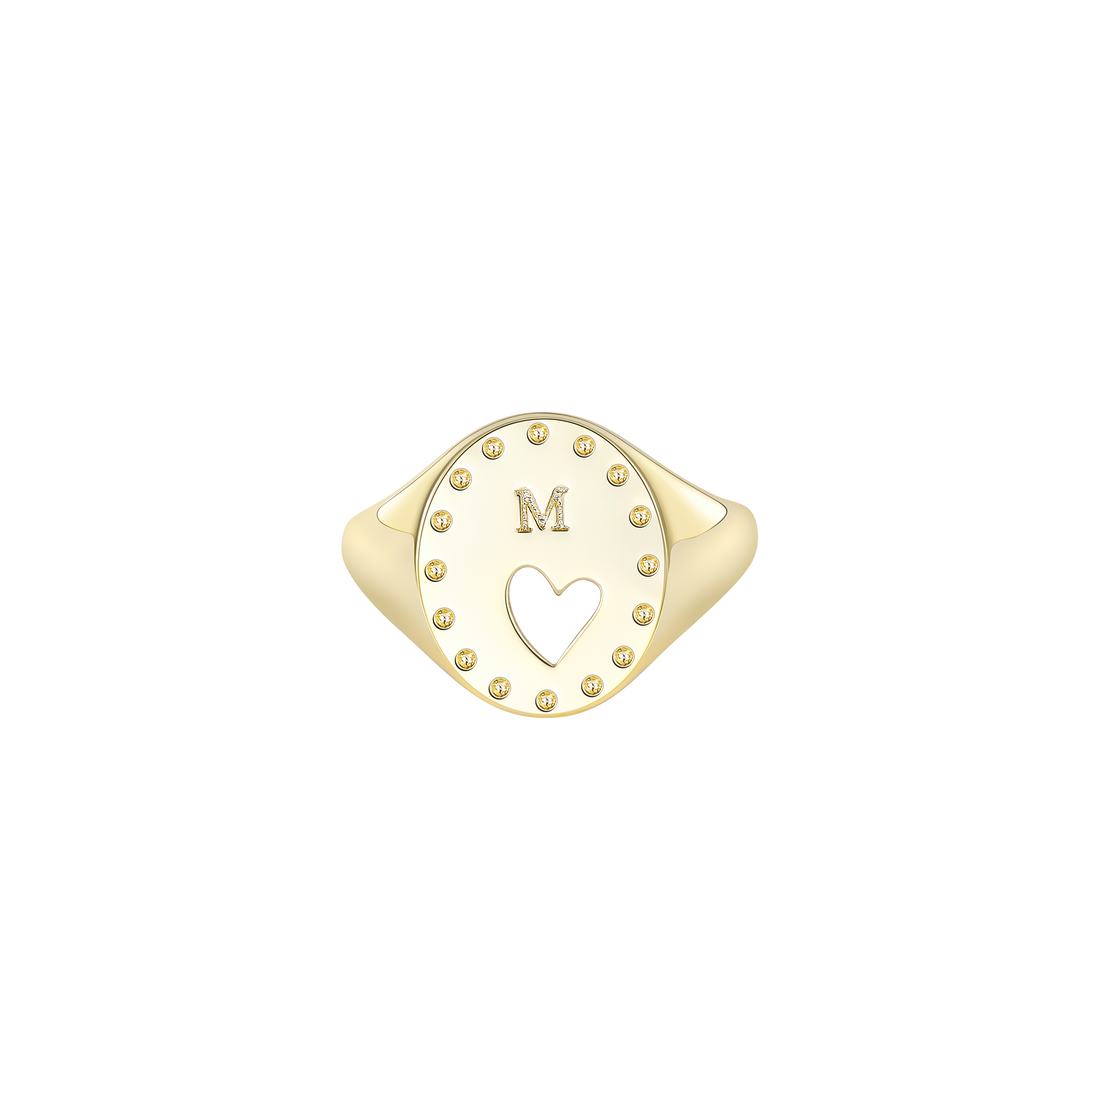 Engraved Heart Openwork Ring